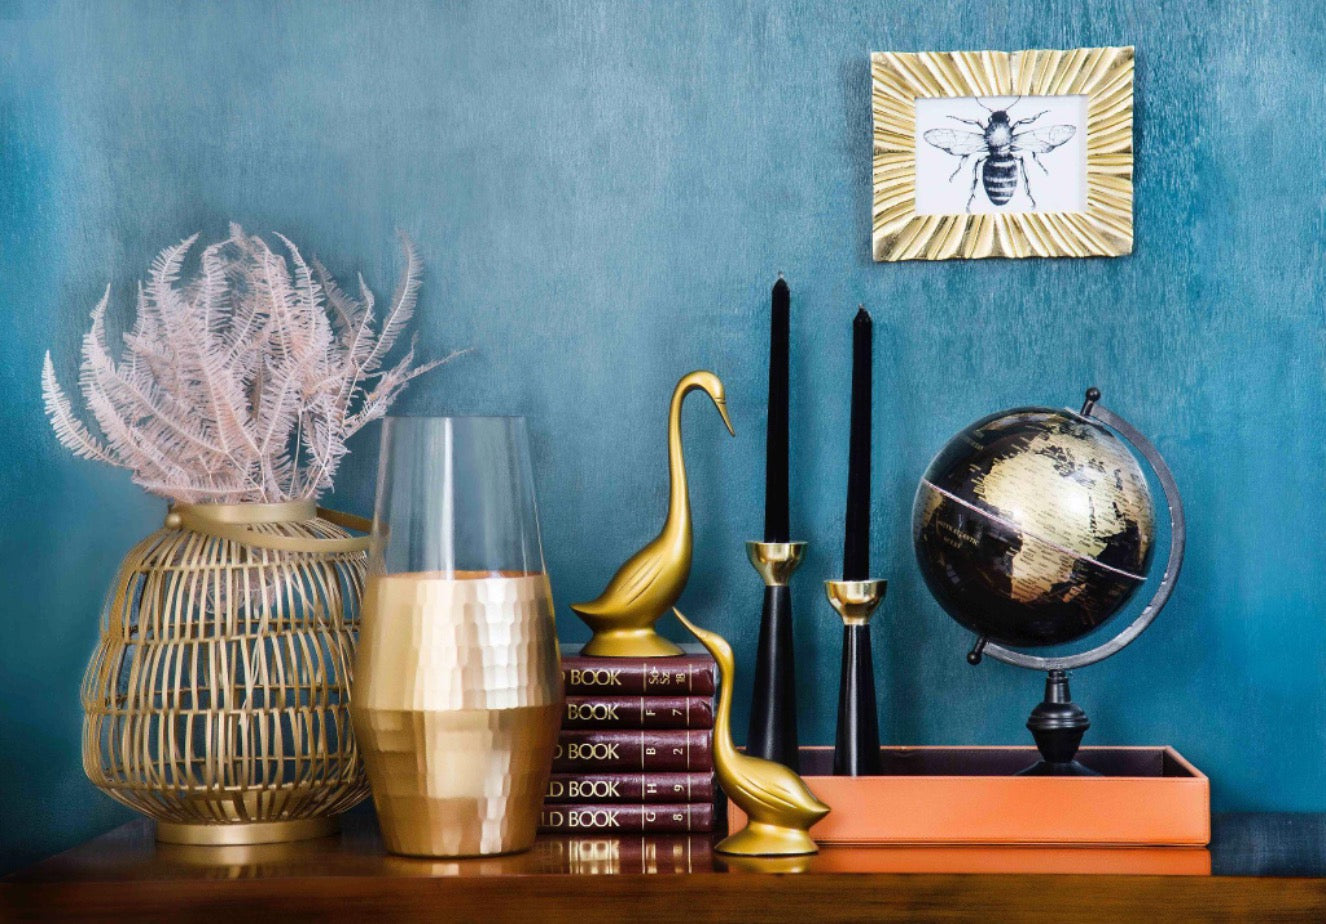 vintage home decor table with vase, globe, brass, books.